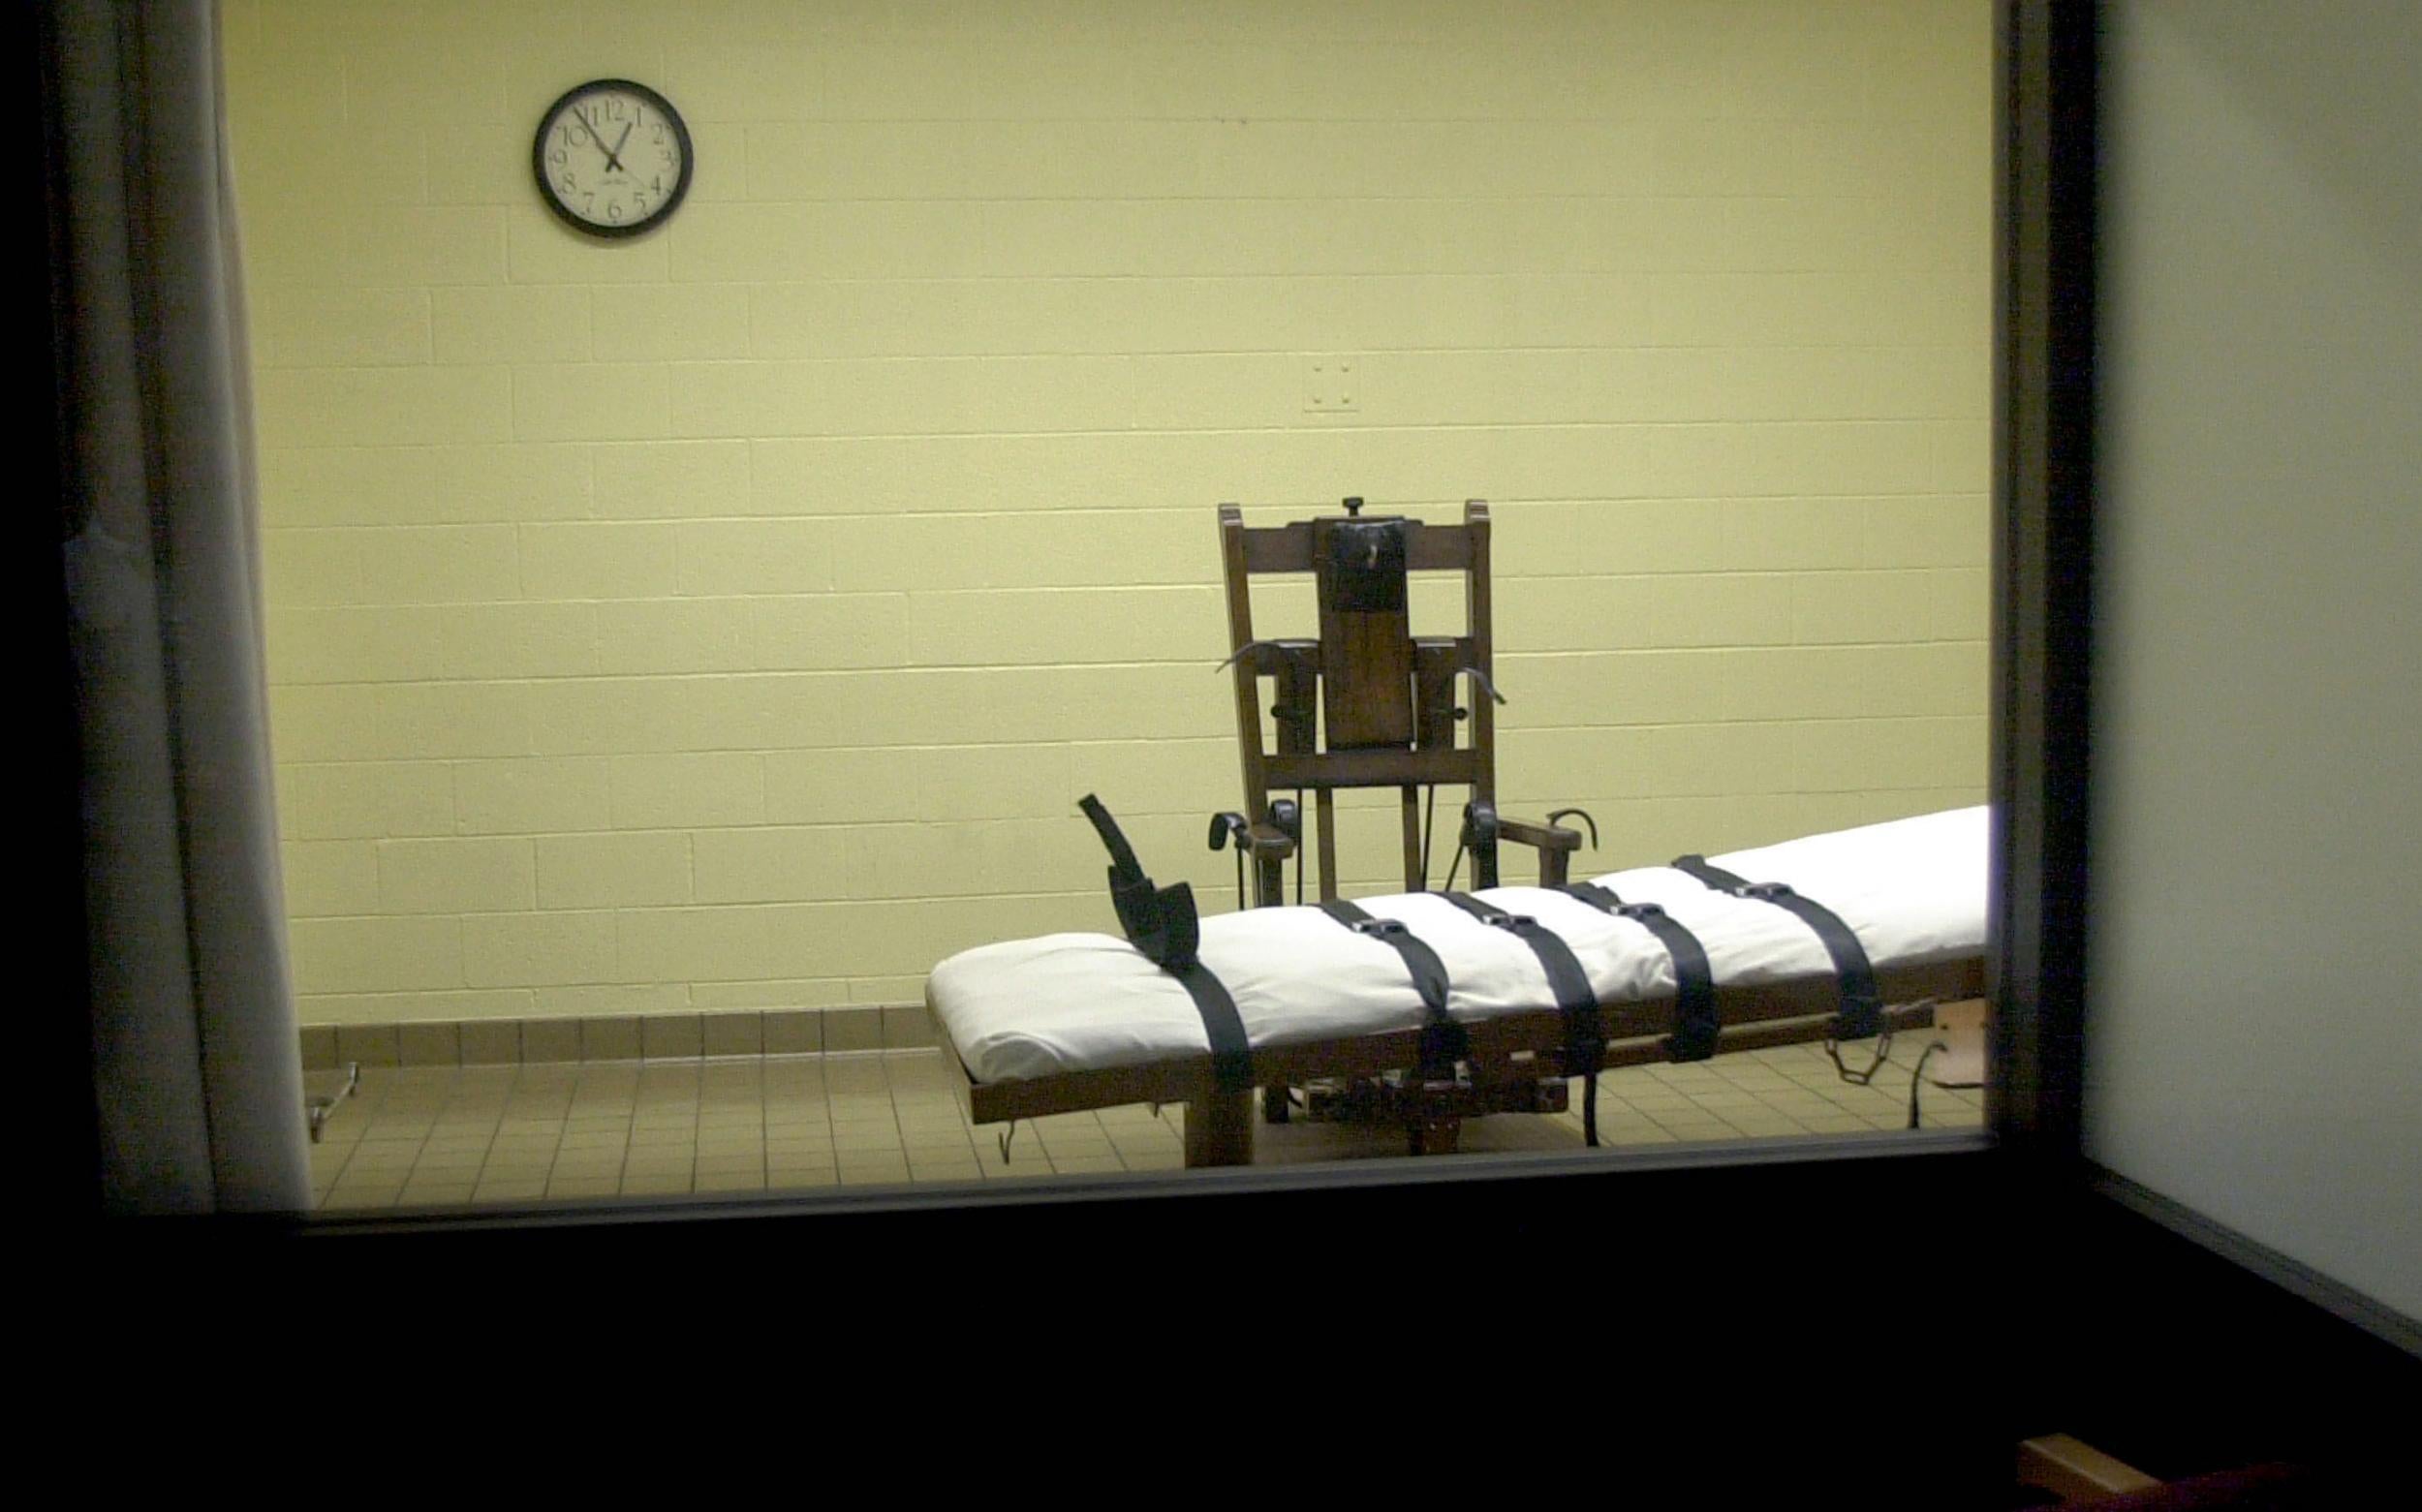 A view of the death chamber from the witness room at the Southern Ohio Correctional Facility shows an electric chair and gurney August 29, 2001 in Lucasville, Ohio.